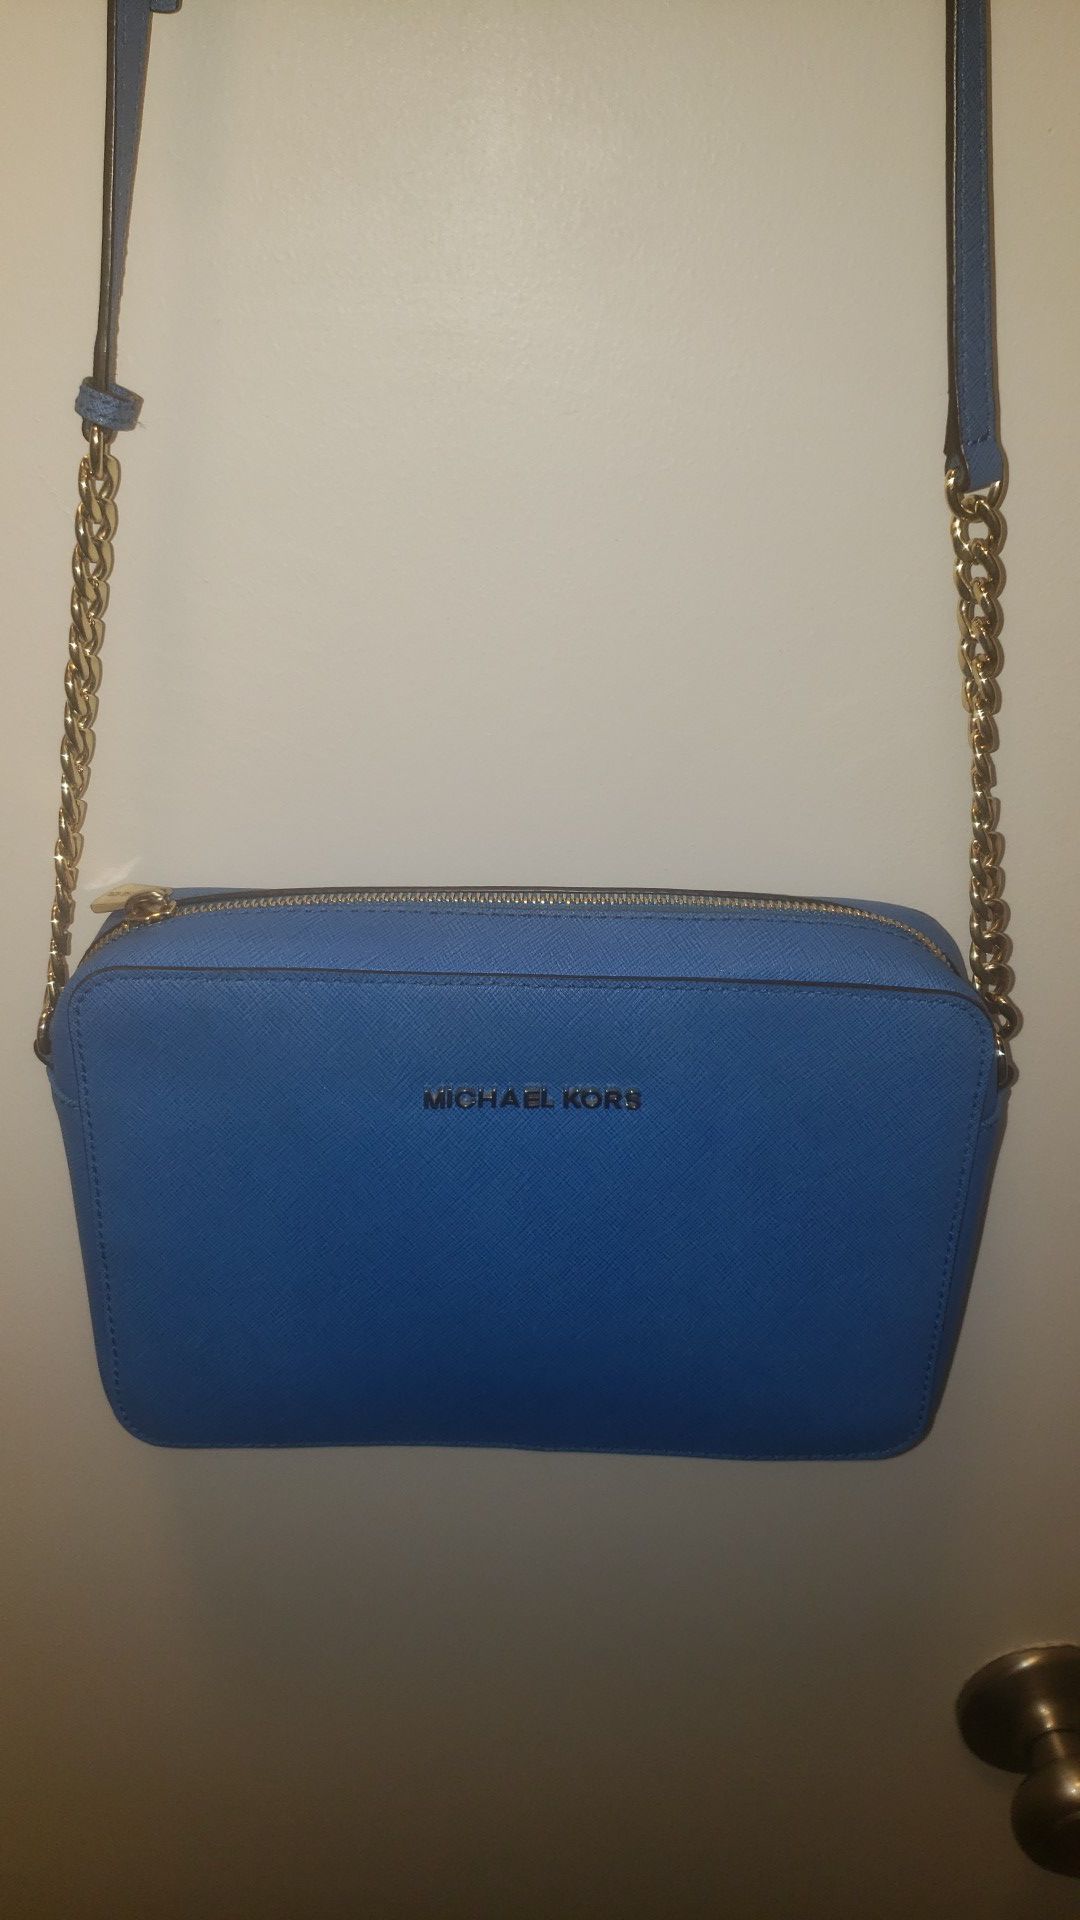 Michael Kors small blue purse with adjustable strap